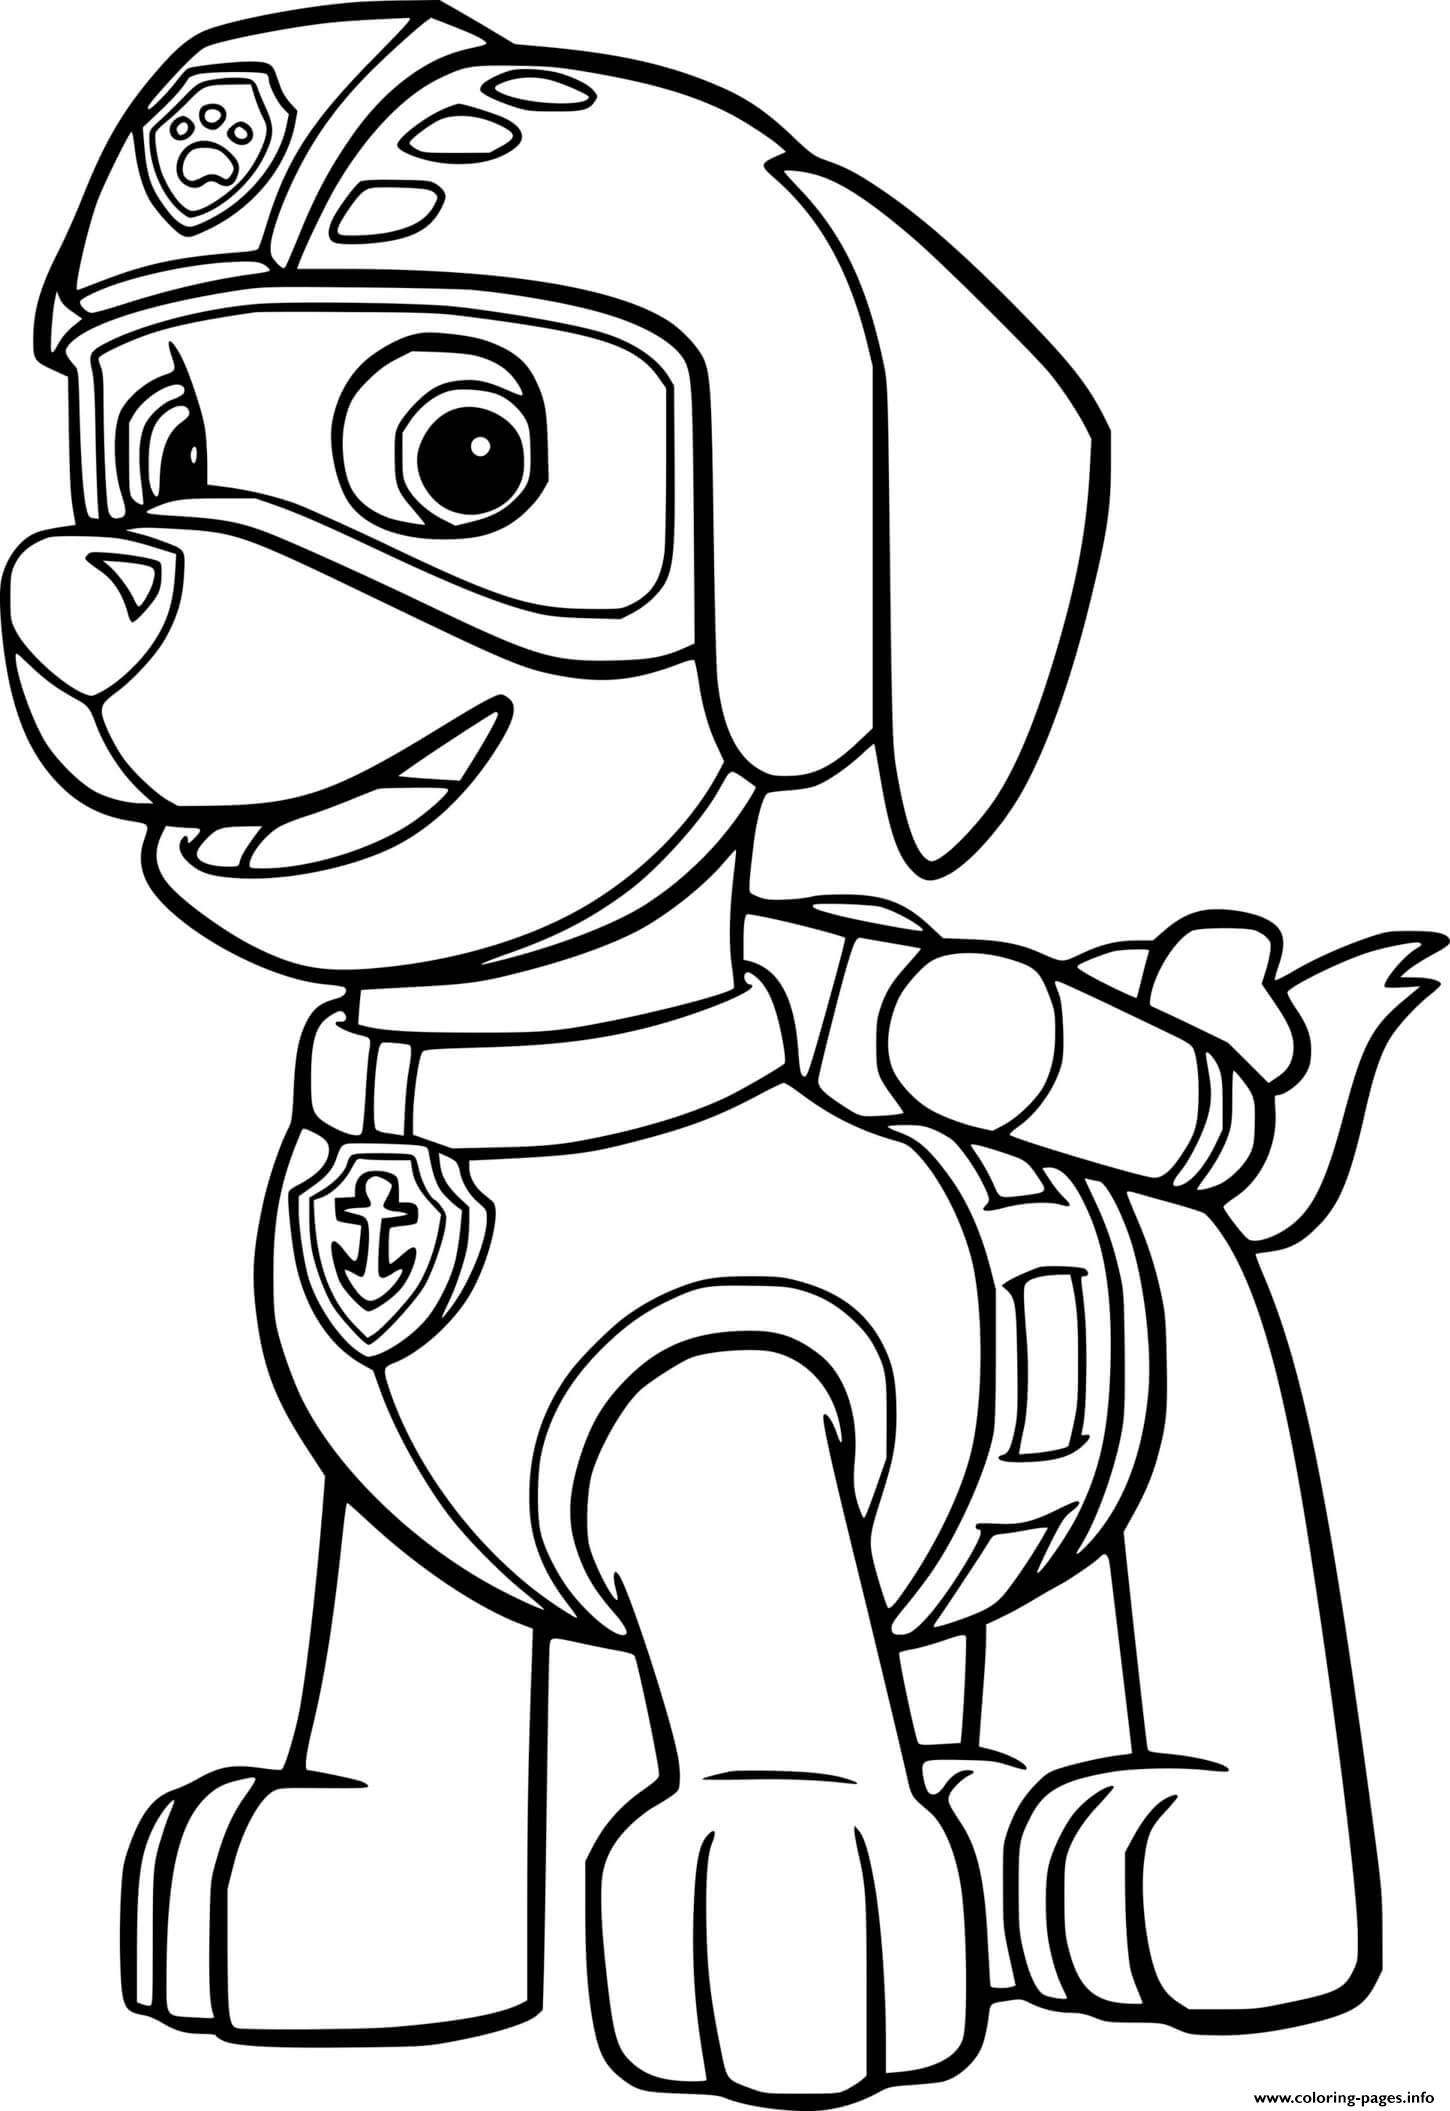 Zuma From Paw Patrol coloring